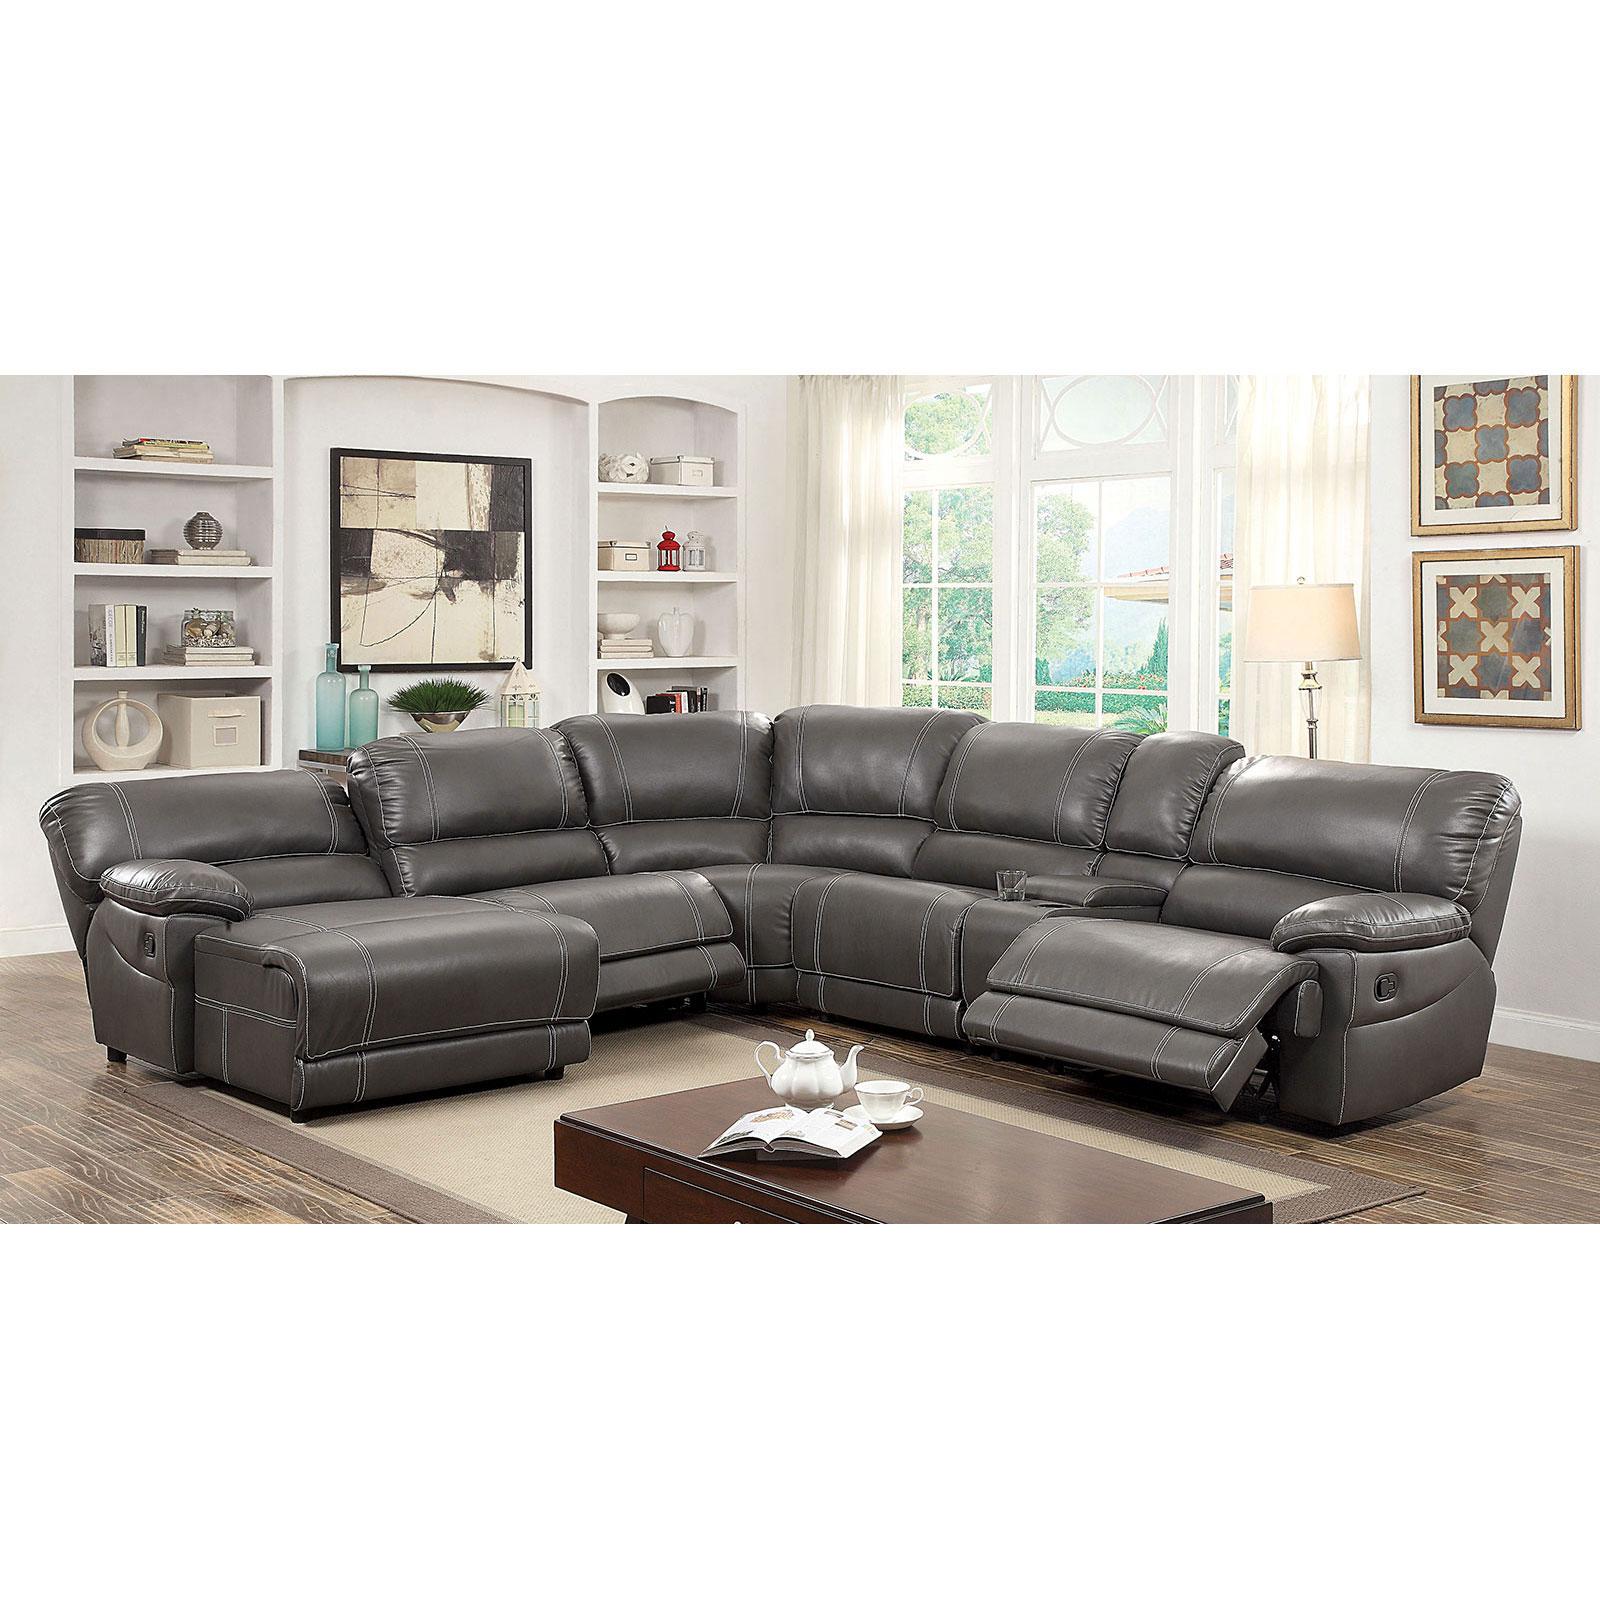 Transitional Reclining Sectional ESTRELLA CM6131GY CM6131GY-SEC in Gray Faux Leather